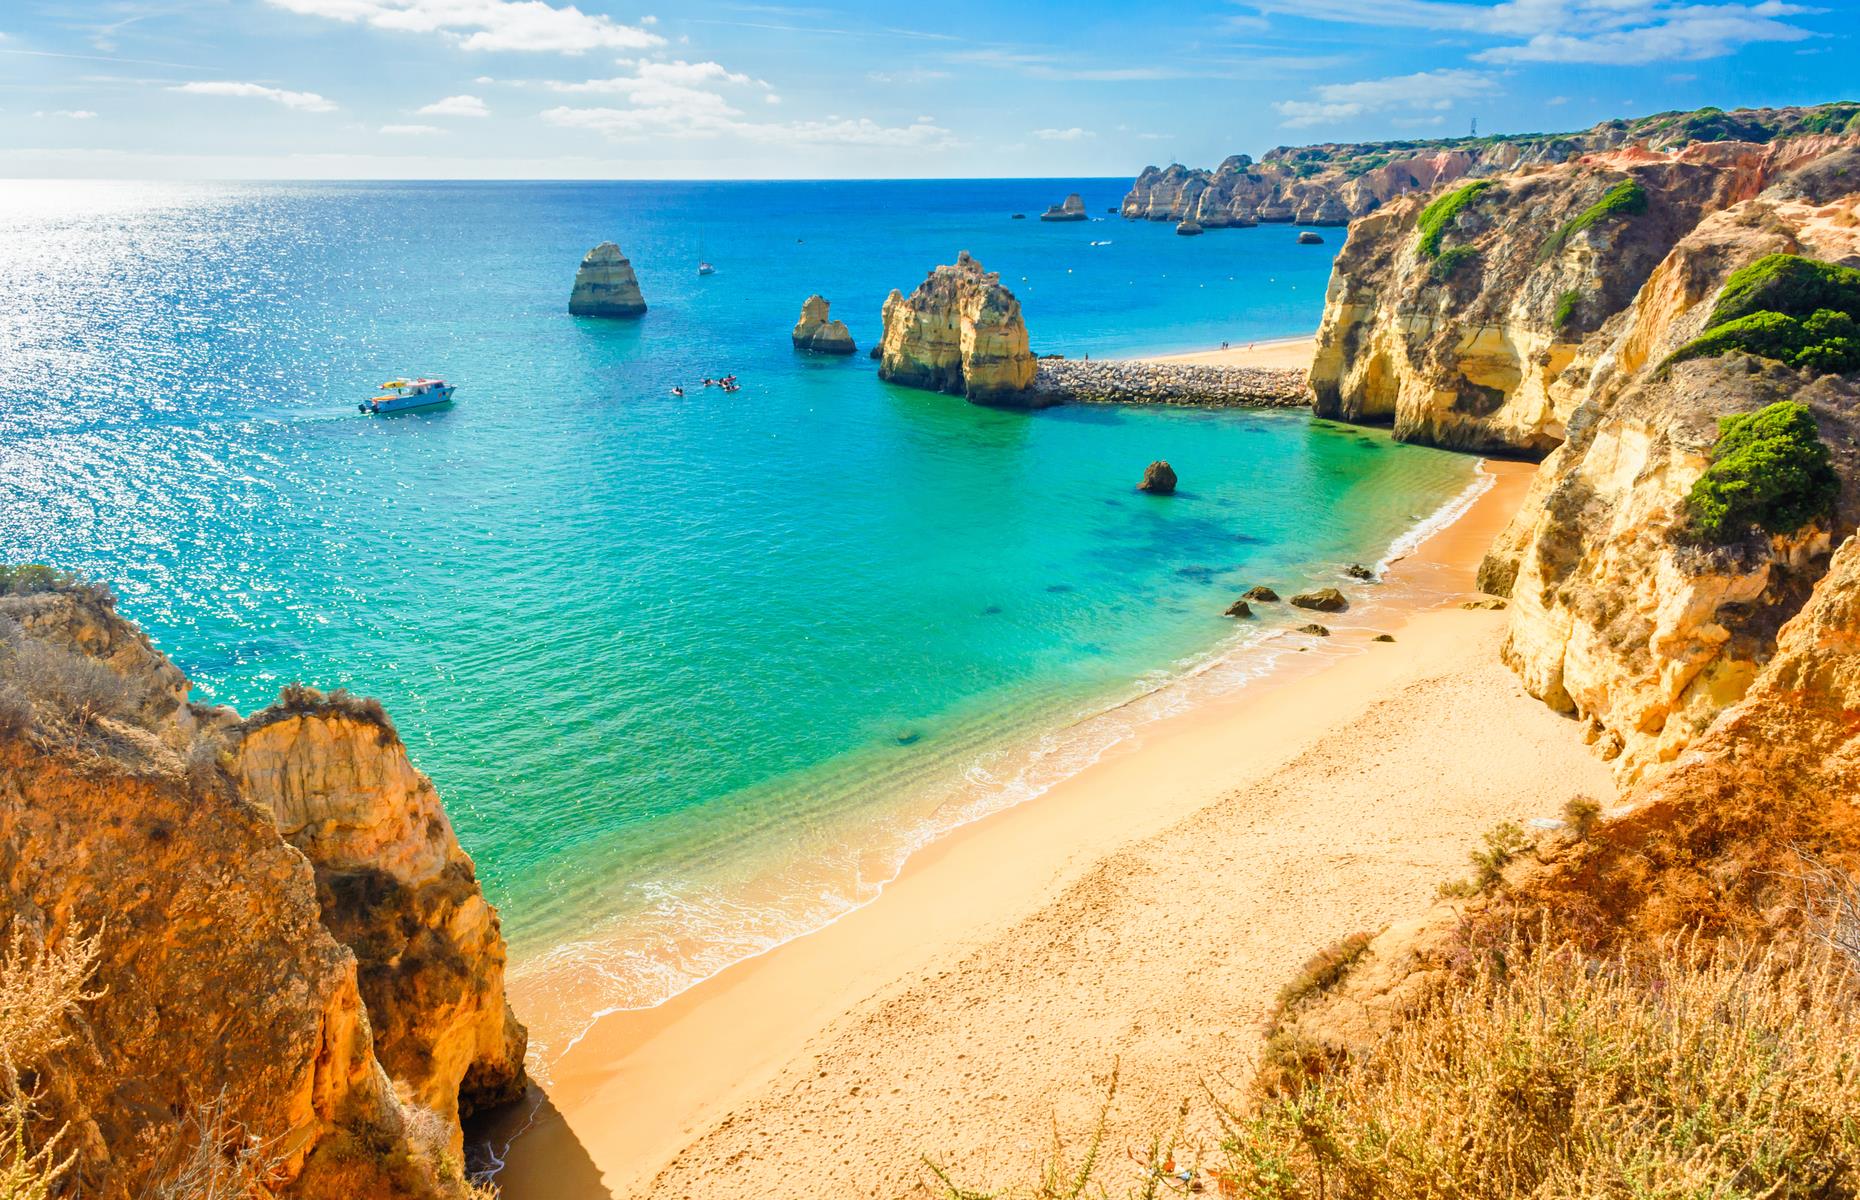 <p>Portugal has long been a summer vacation staple, and its appeal ranges from the <a href="https://www.loveexploring.com/news/78752/the-eastern-algarve-7-reasons-to-visit-portugals-bestkept-secret">beaches of the Algarve</a> and the mountains <a href="https://www.loveexploring.com/news/83327/6-reasons-to-visit-centro-de-portugal">in the country's center</a> to the fabled <a href="http://www.loveexploring.com/guides/69830/what-to-do-in-lisbon-tourist-attractions">Lisbon Old Town</a> and historic <a href="https://www.loveexploring.com/guides/66209/what-to-do-in-porto">city of Porto</a>. Food is one of Portugal's best-known assets. Be sure to try the famous custard tarts, pastéis de nata, fresh seafood and native wines. For the ultimate guide to the different areas of Portugal, <a href="https://www.loveexploring.com/guides/73966/the-best-places-to-visit-in-portugal-by-region">take a look here.</a></p>